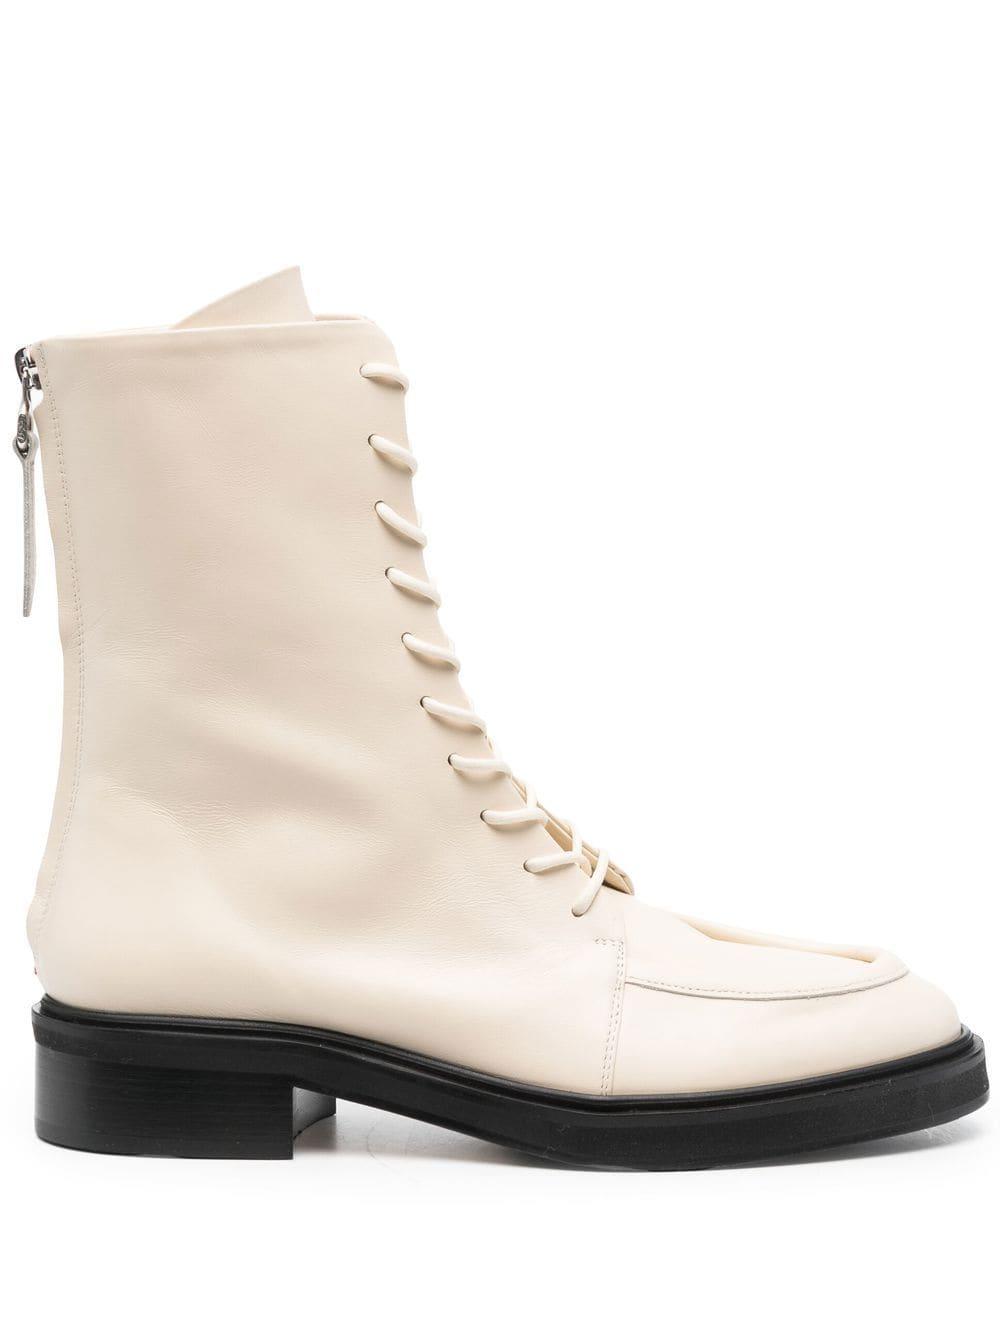 Aeyde Low Heel Combat Boots in Natural | Lyst